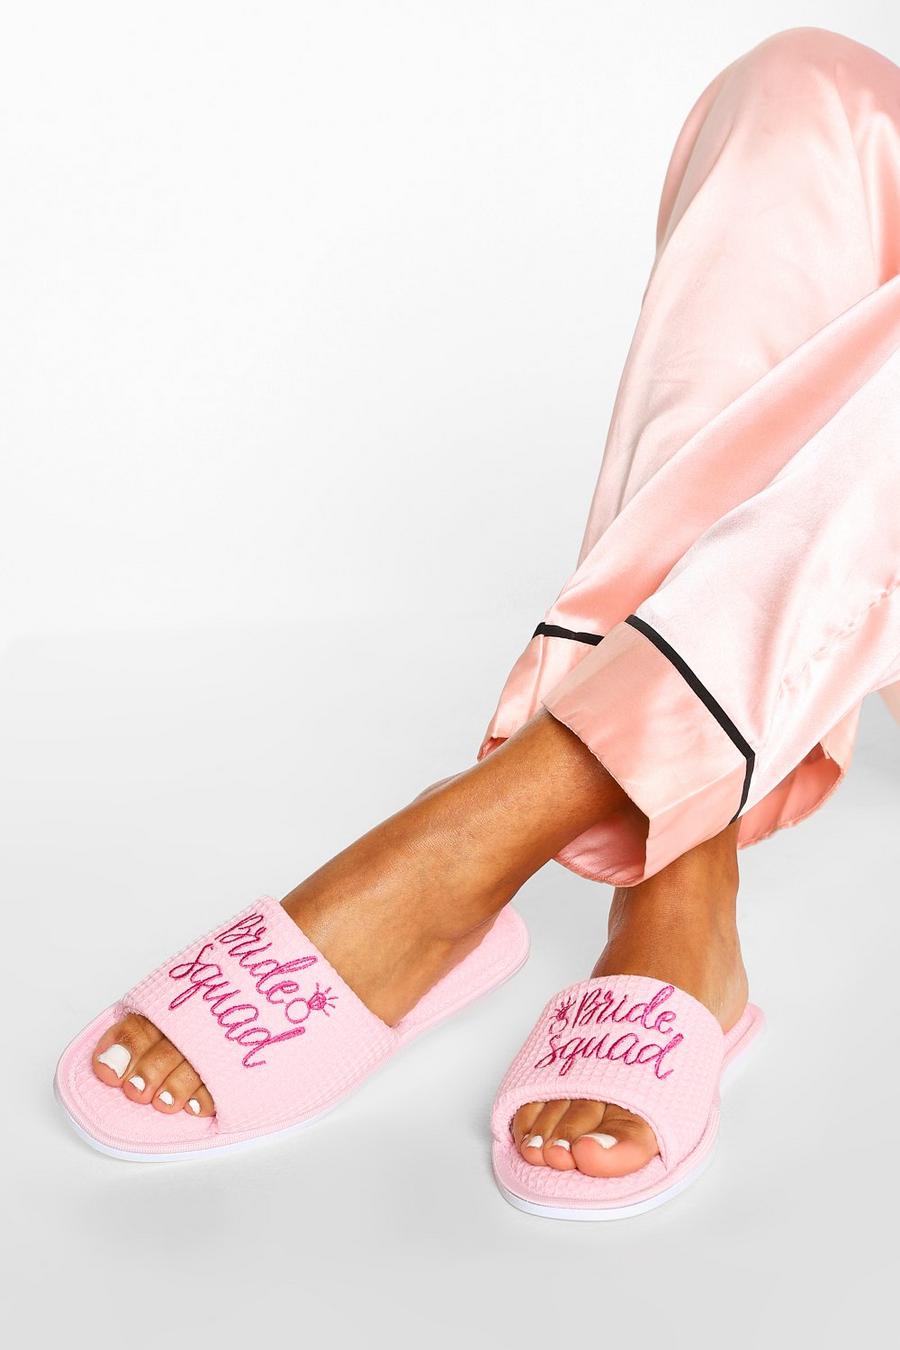 Pink Bride Squad Slippers in a Bag